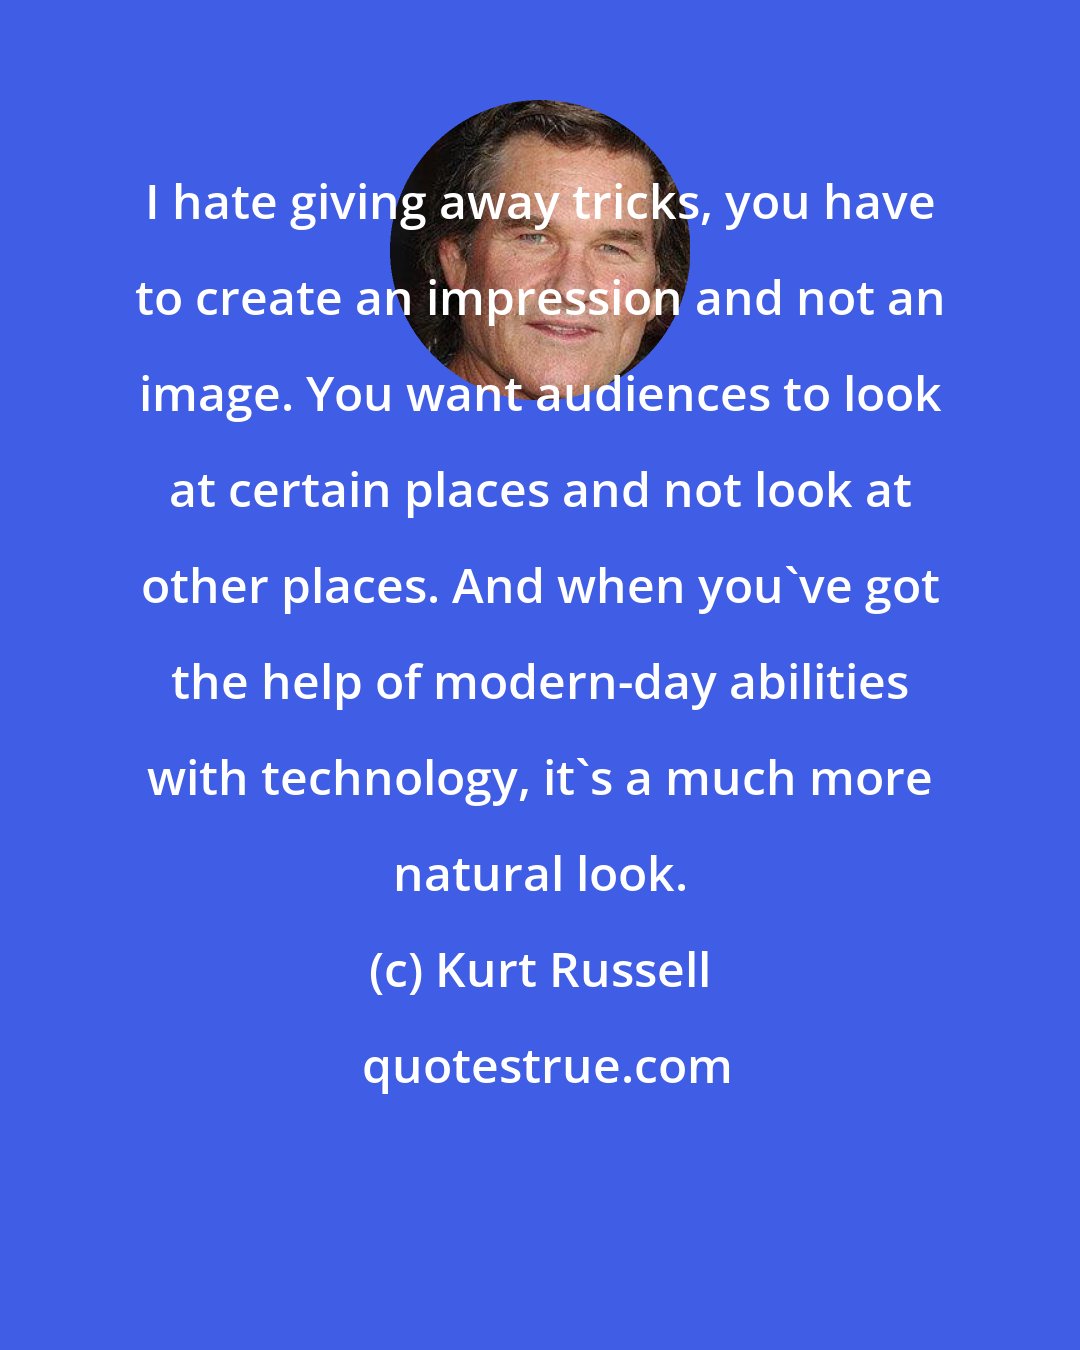 Kurt Russell: I hate giving away tricks, you have to create an impression and not an image. You want audiences to look at certain places and not look at other places. And when you've got the help of modern-day abilities with technology, it's a much more natural look.